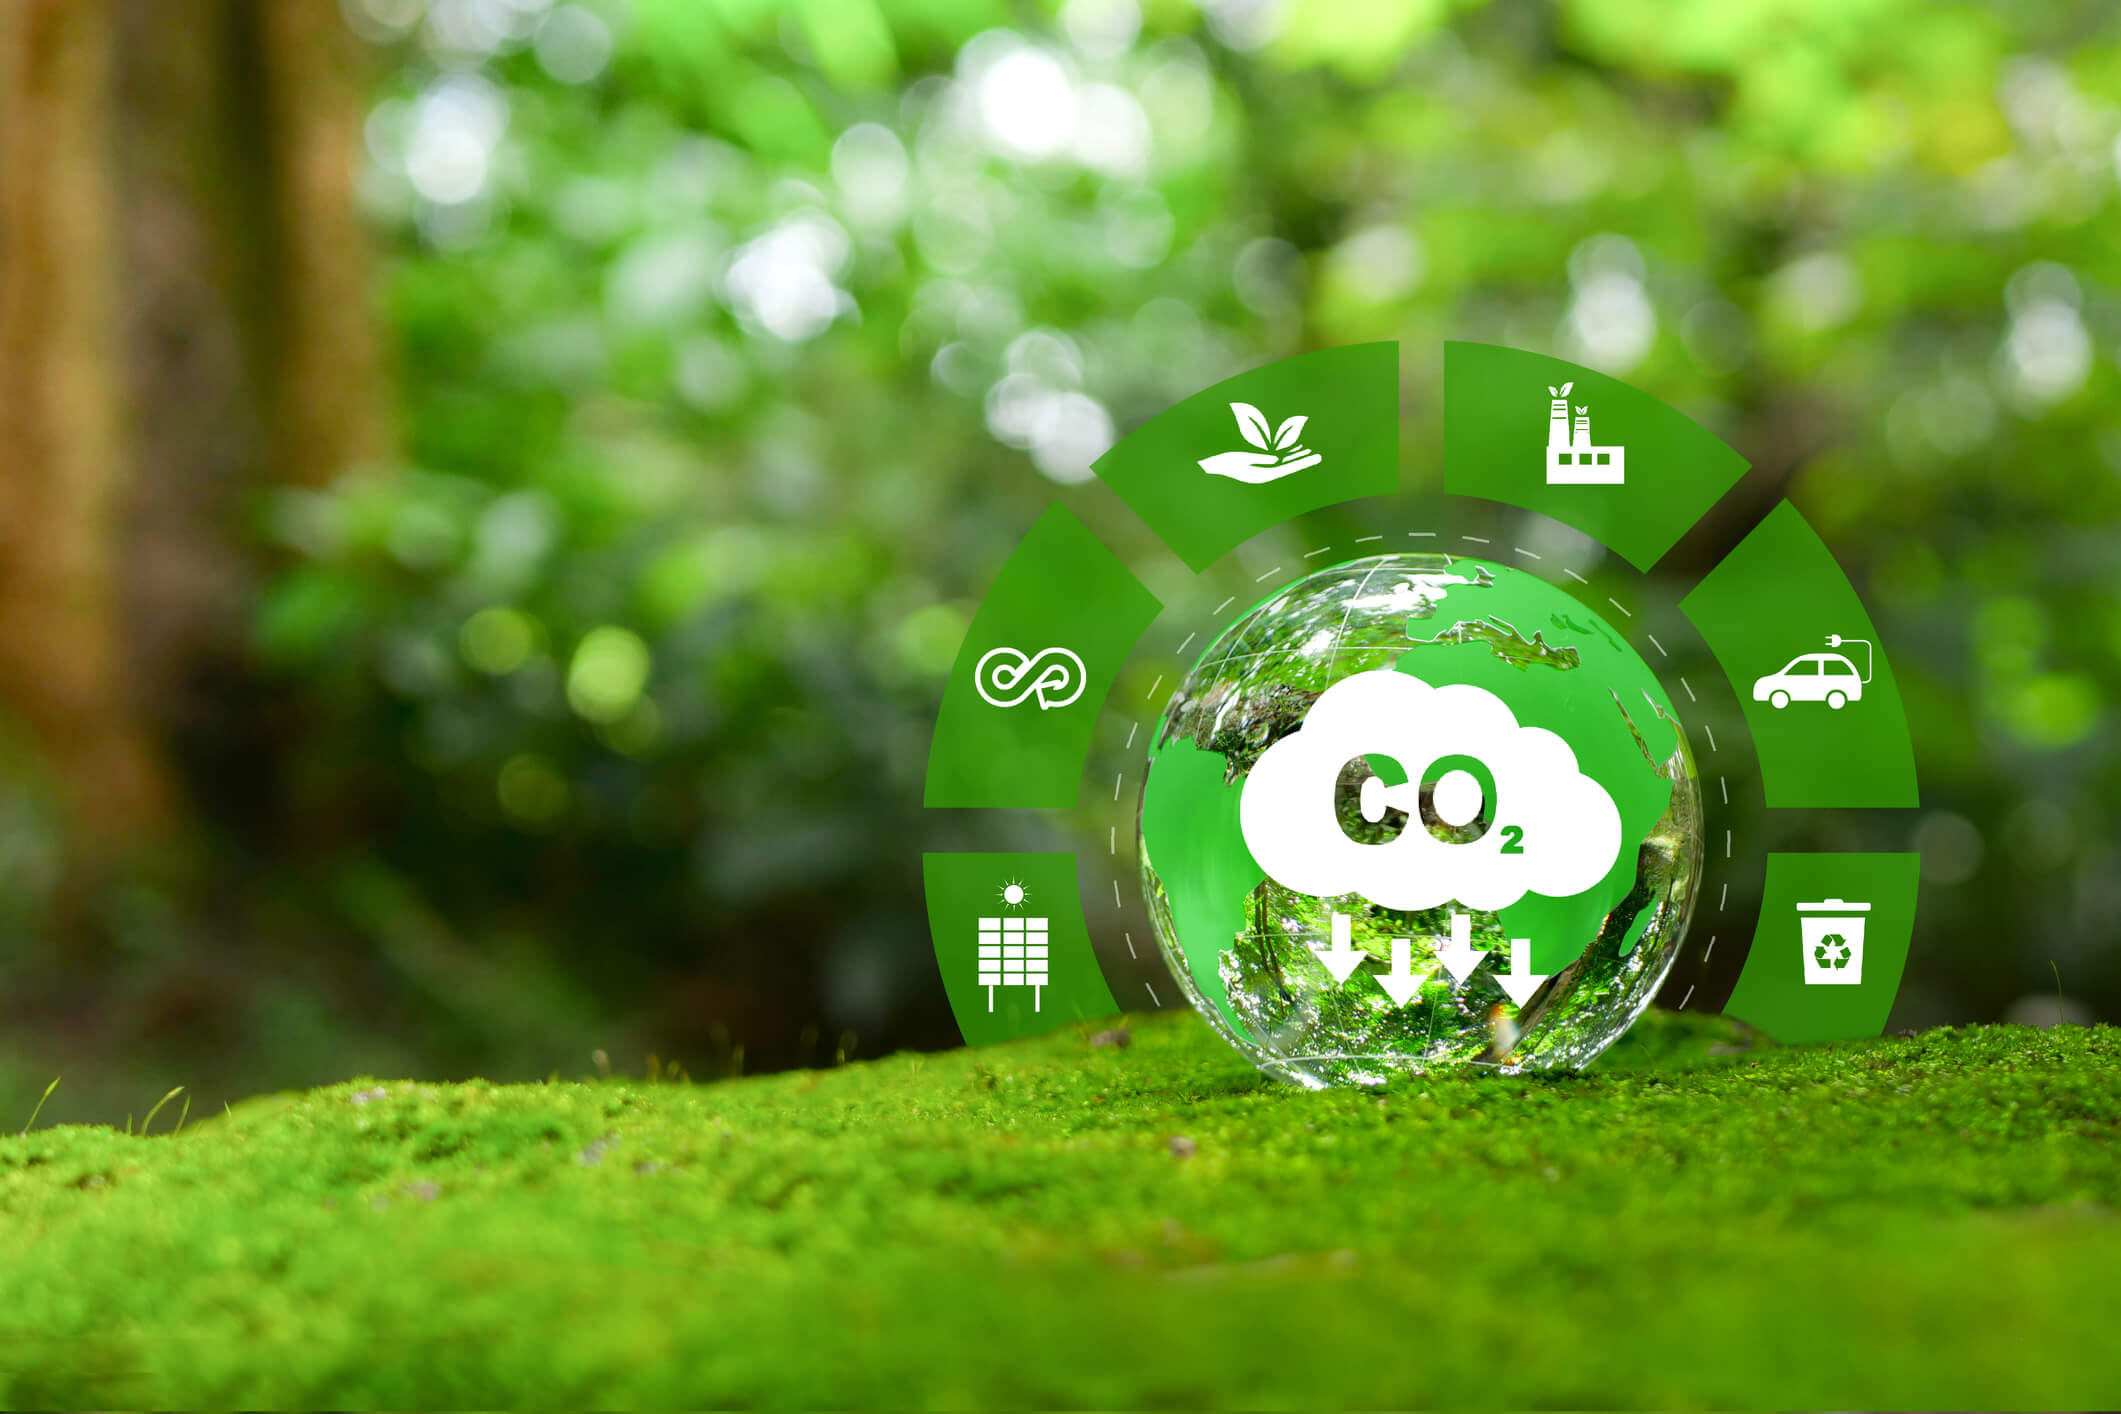 Greenery in forest with a green CO2 graphic showing a green world